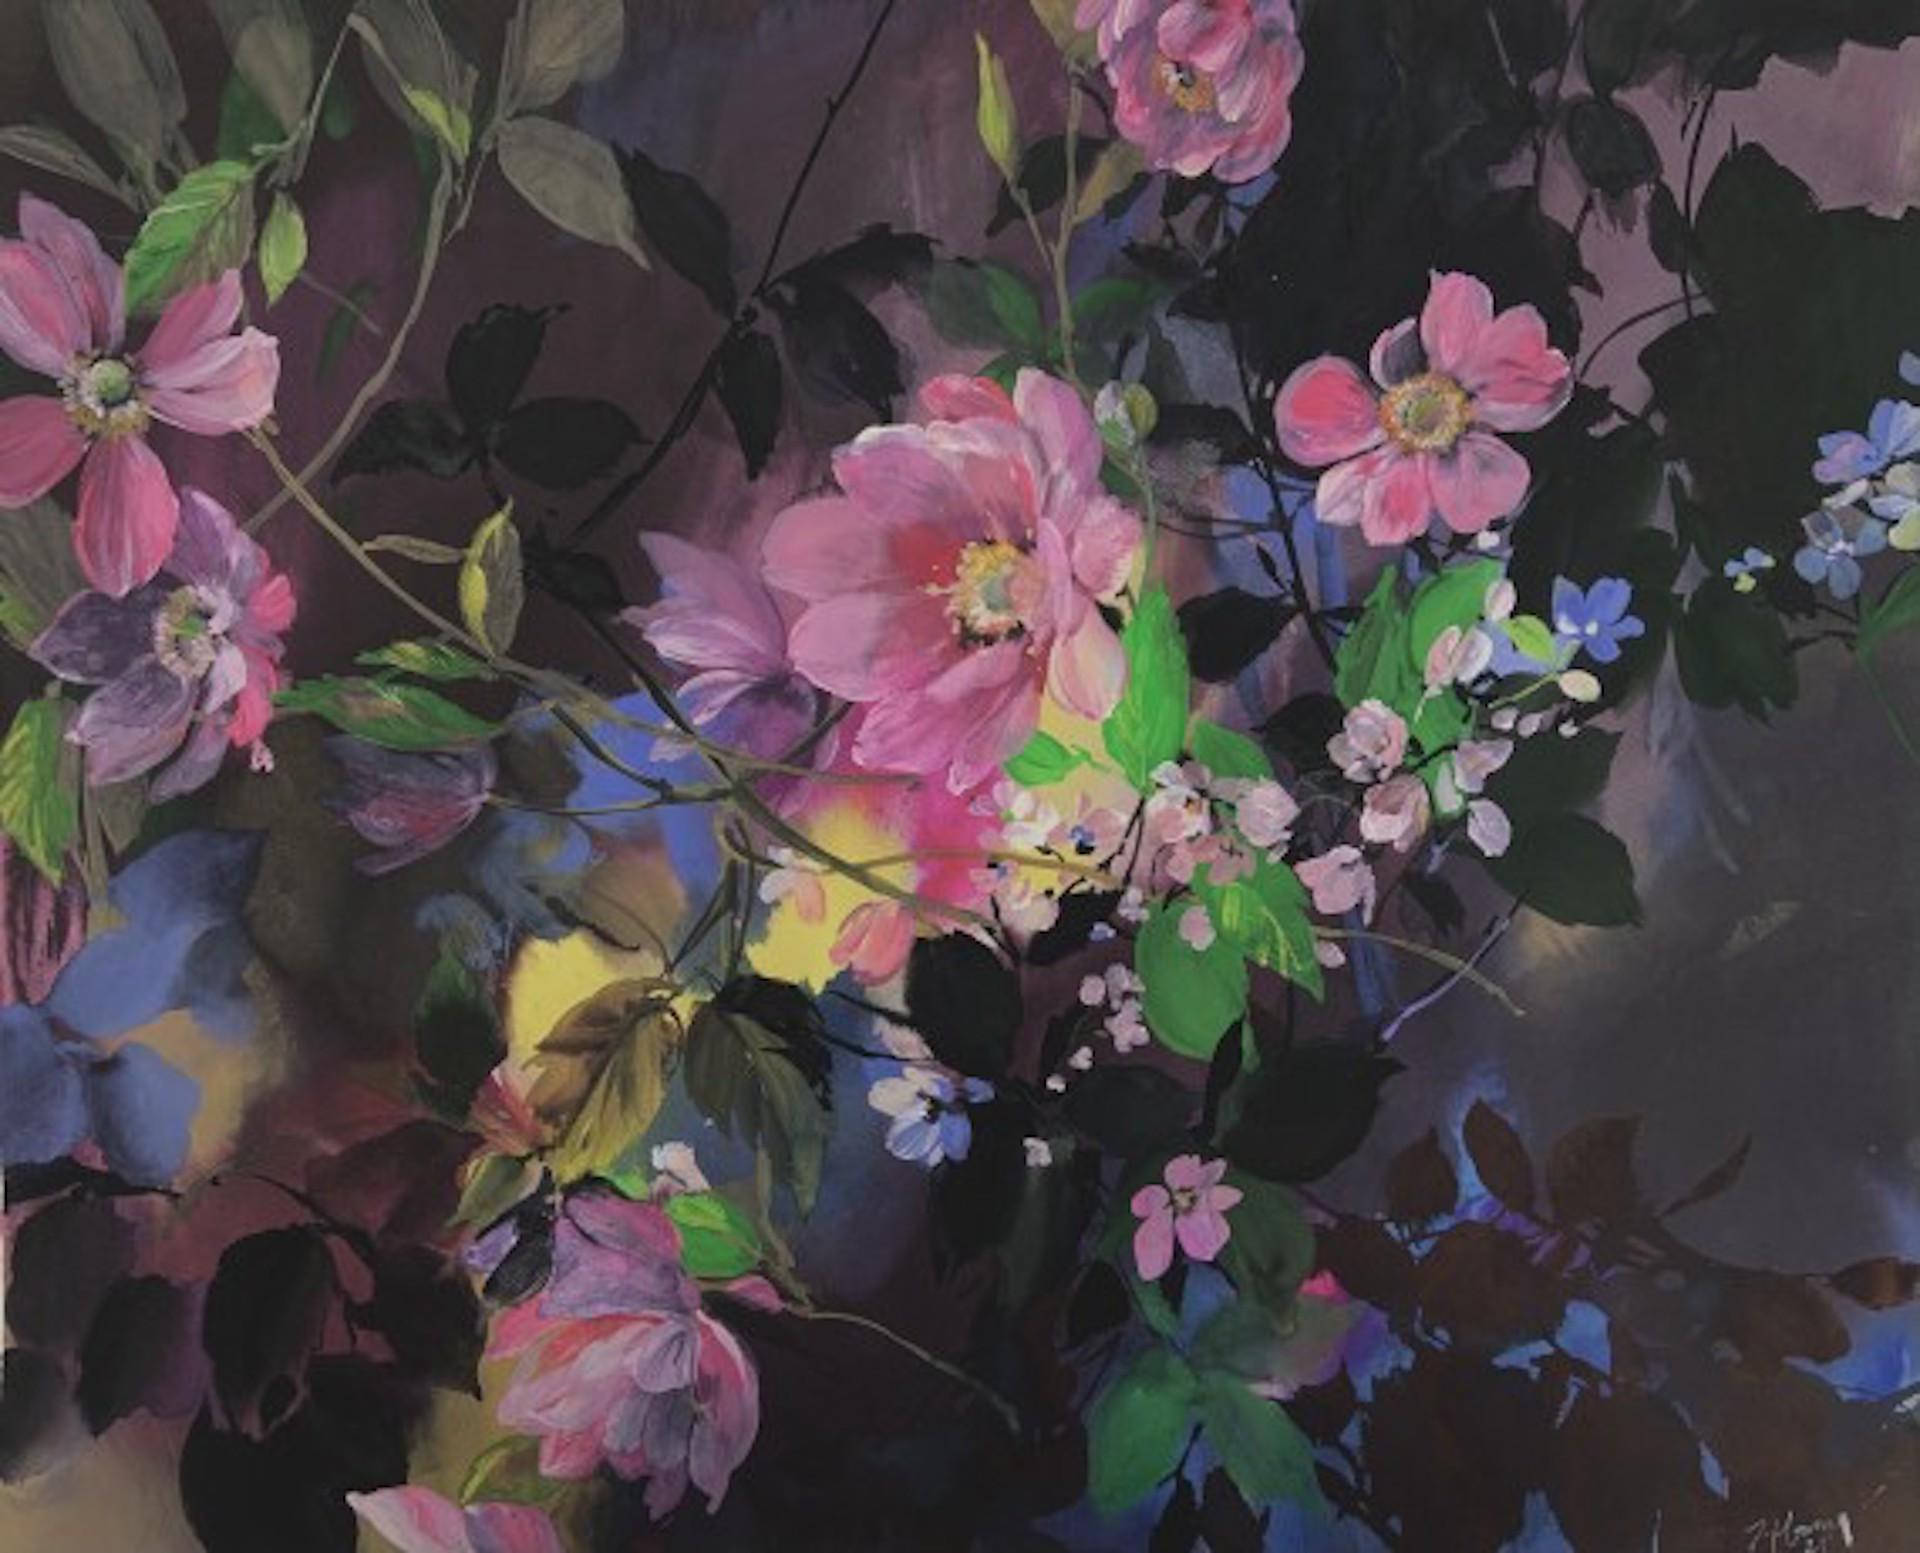 Jo Haran, Jewel Heads in Darkness, Contemporary Floral Art, Affordable Art